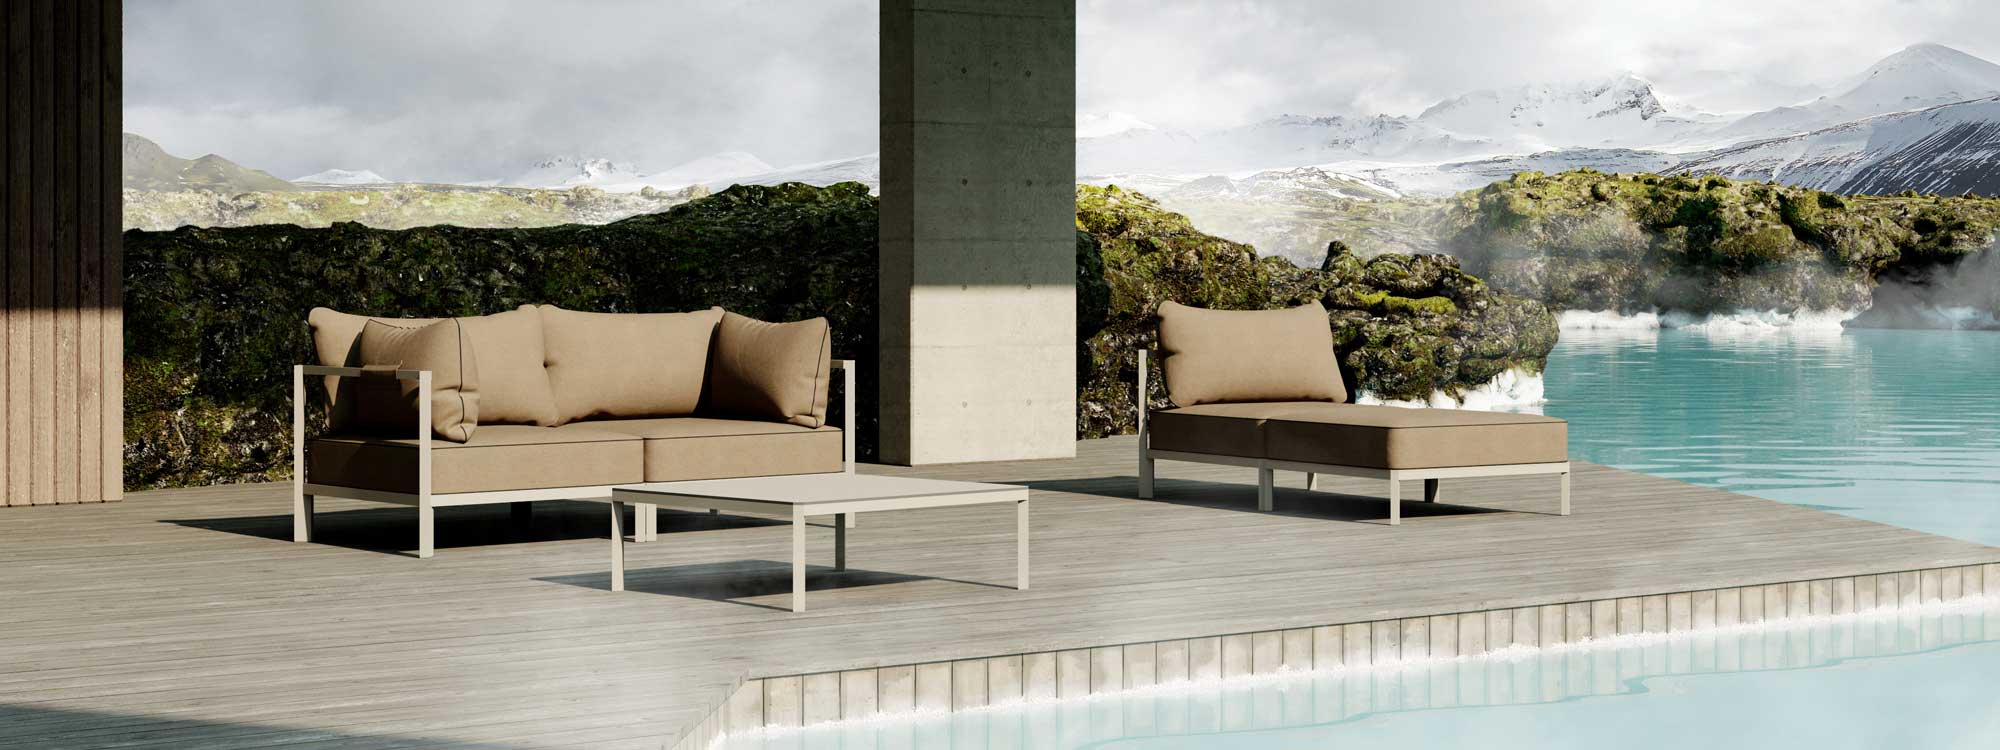 Image of Oiside 45 2 seater garden sofa and chaise longue with timeless linear design, shown on poolside with snowy mountains in the background